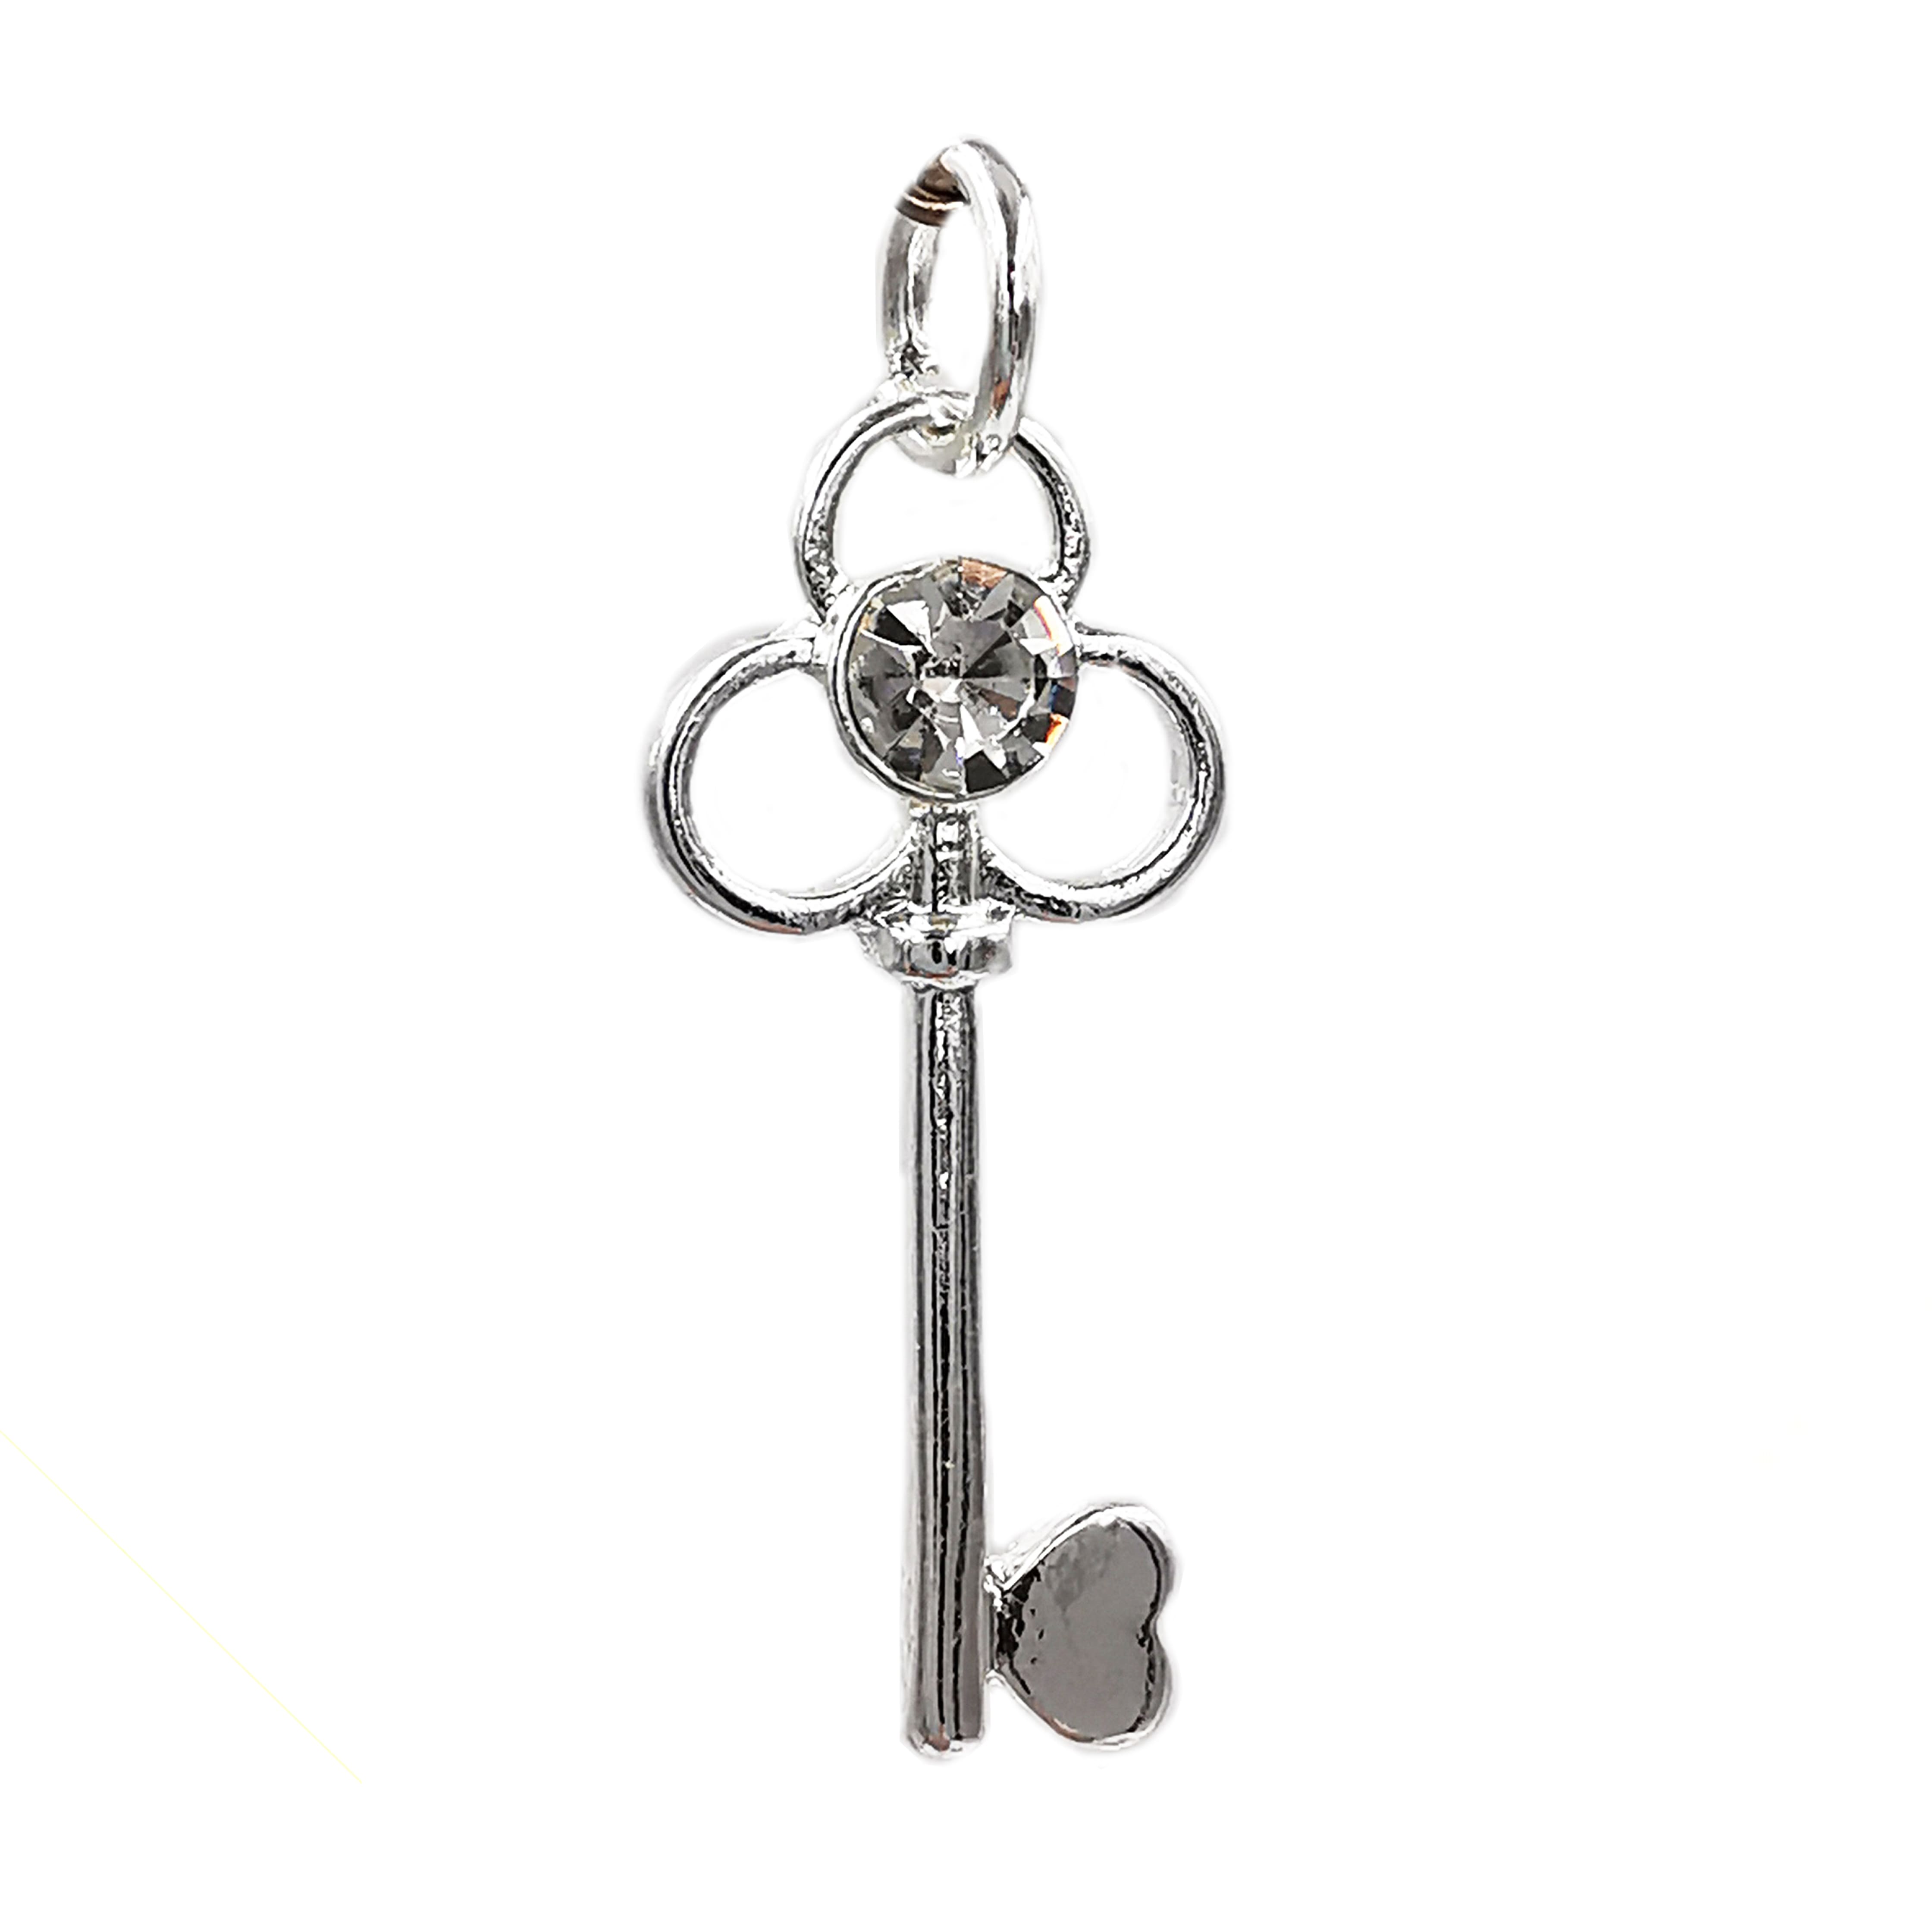 Charmalong™ Silver Plated Crystal Key Charm by Bead Landing